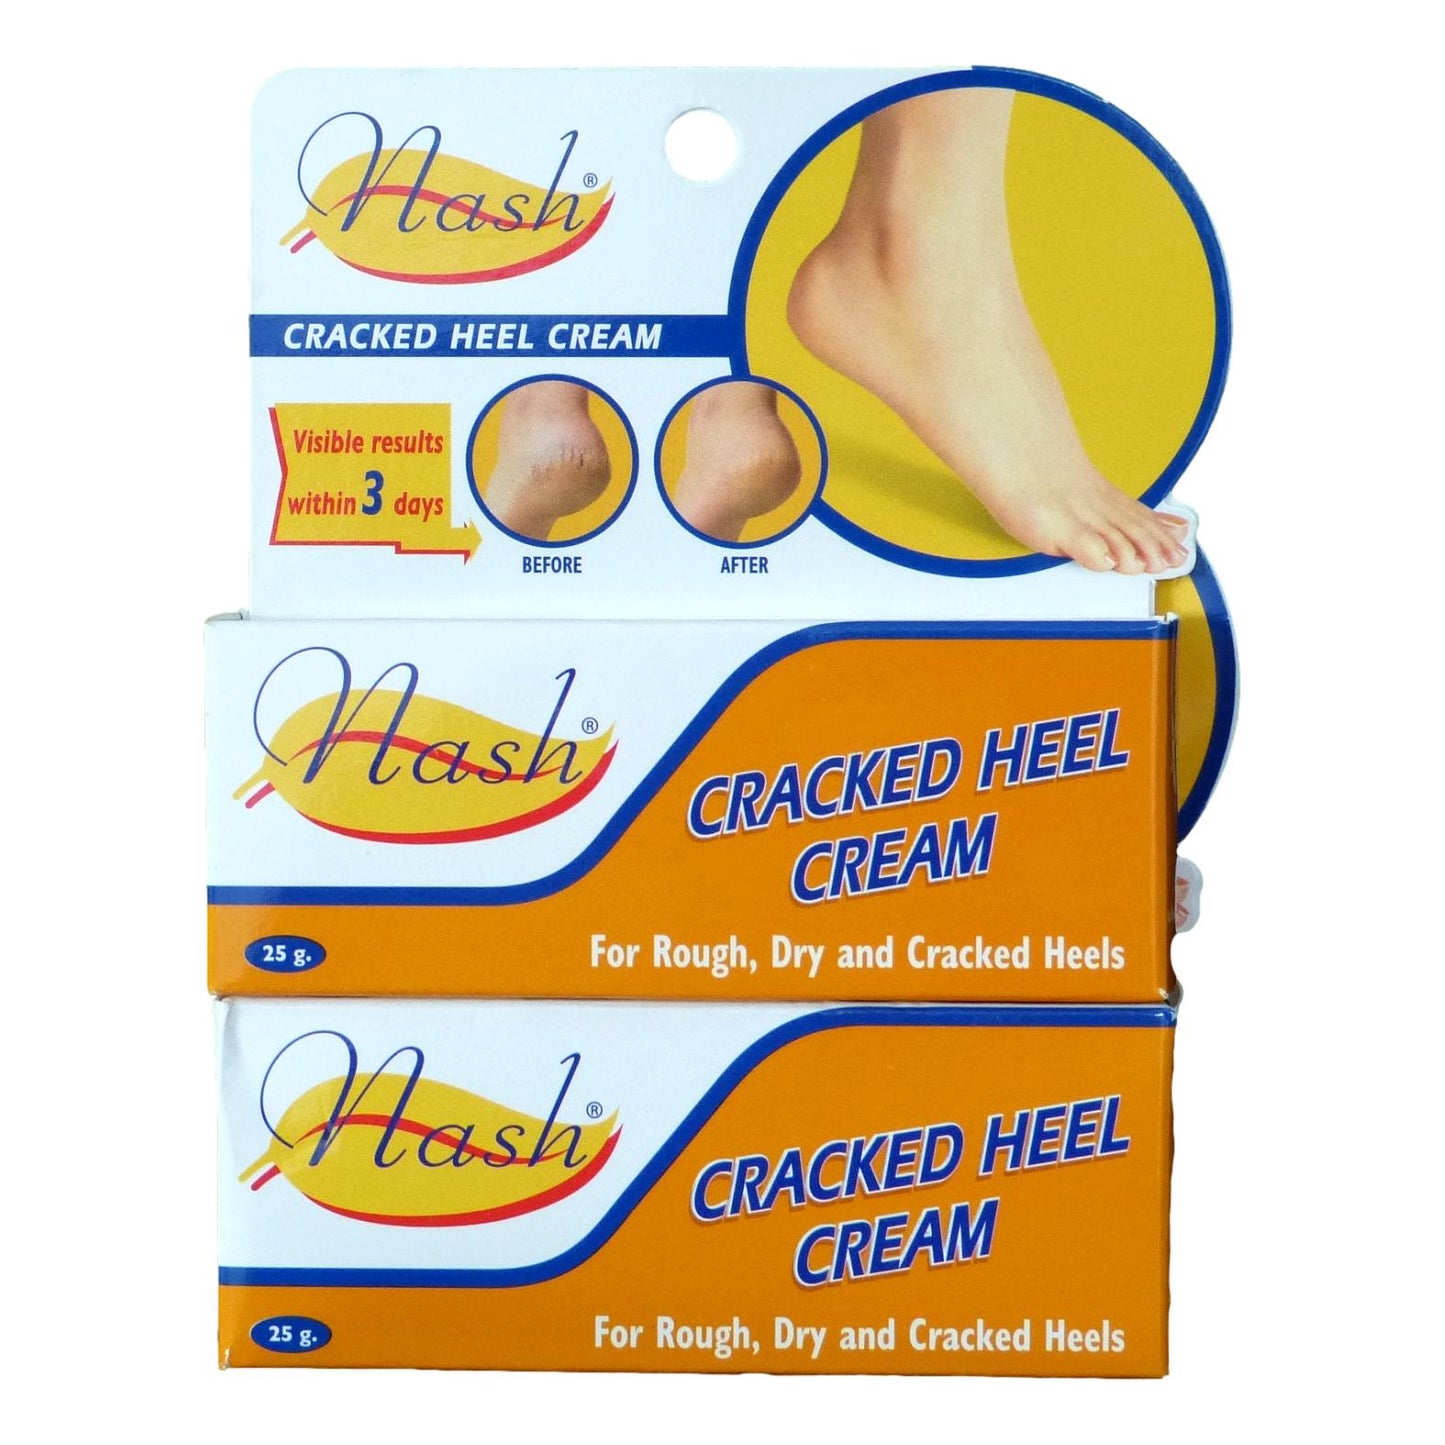 Nash Cracked Heel Cream for Cracked Heels 25g Pack of 2 - Asian Beauty Supply